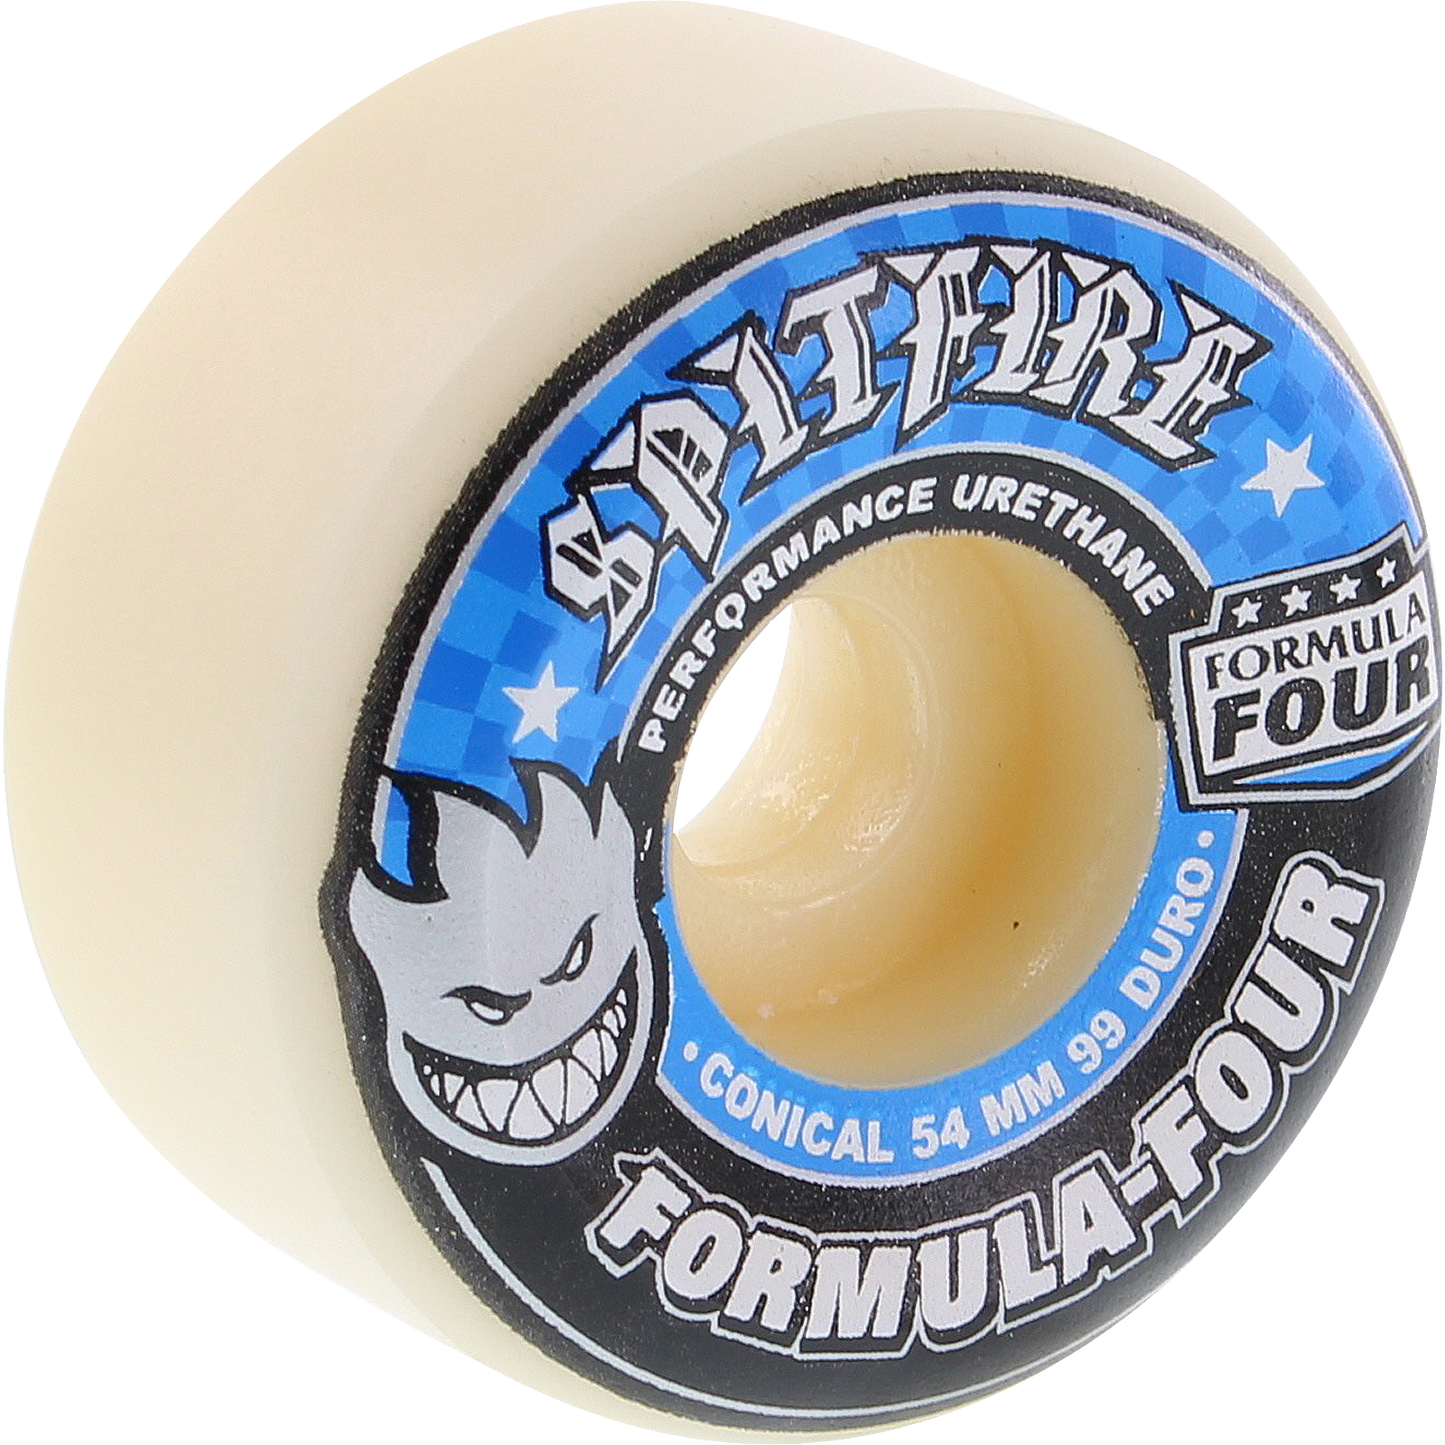 Spitfire F4 99a Conical Full 54mm White/Blue Skateboard Wheels (Set of 4)